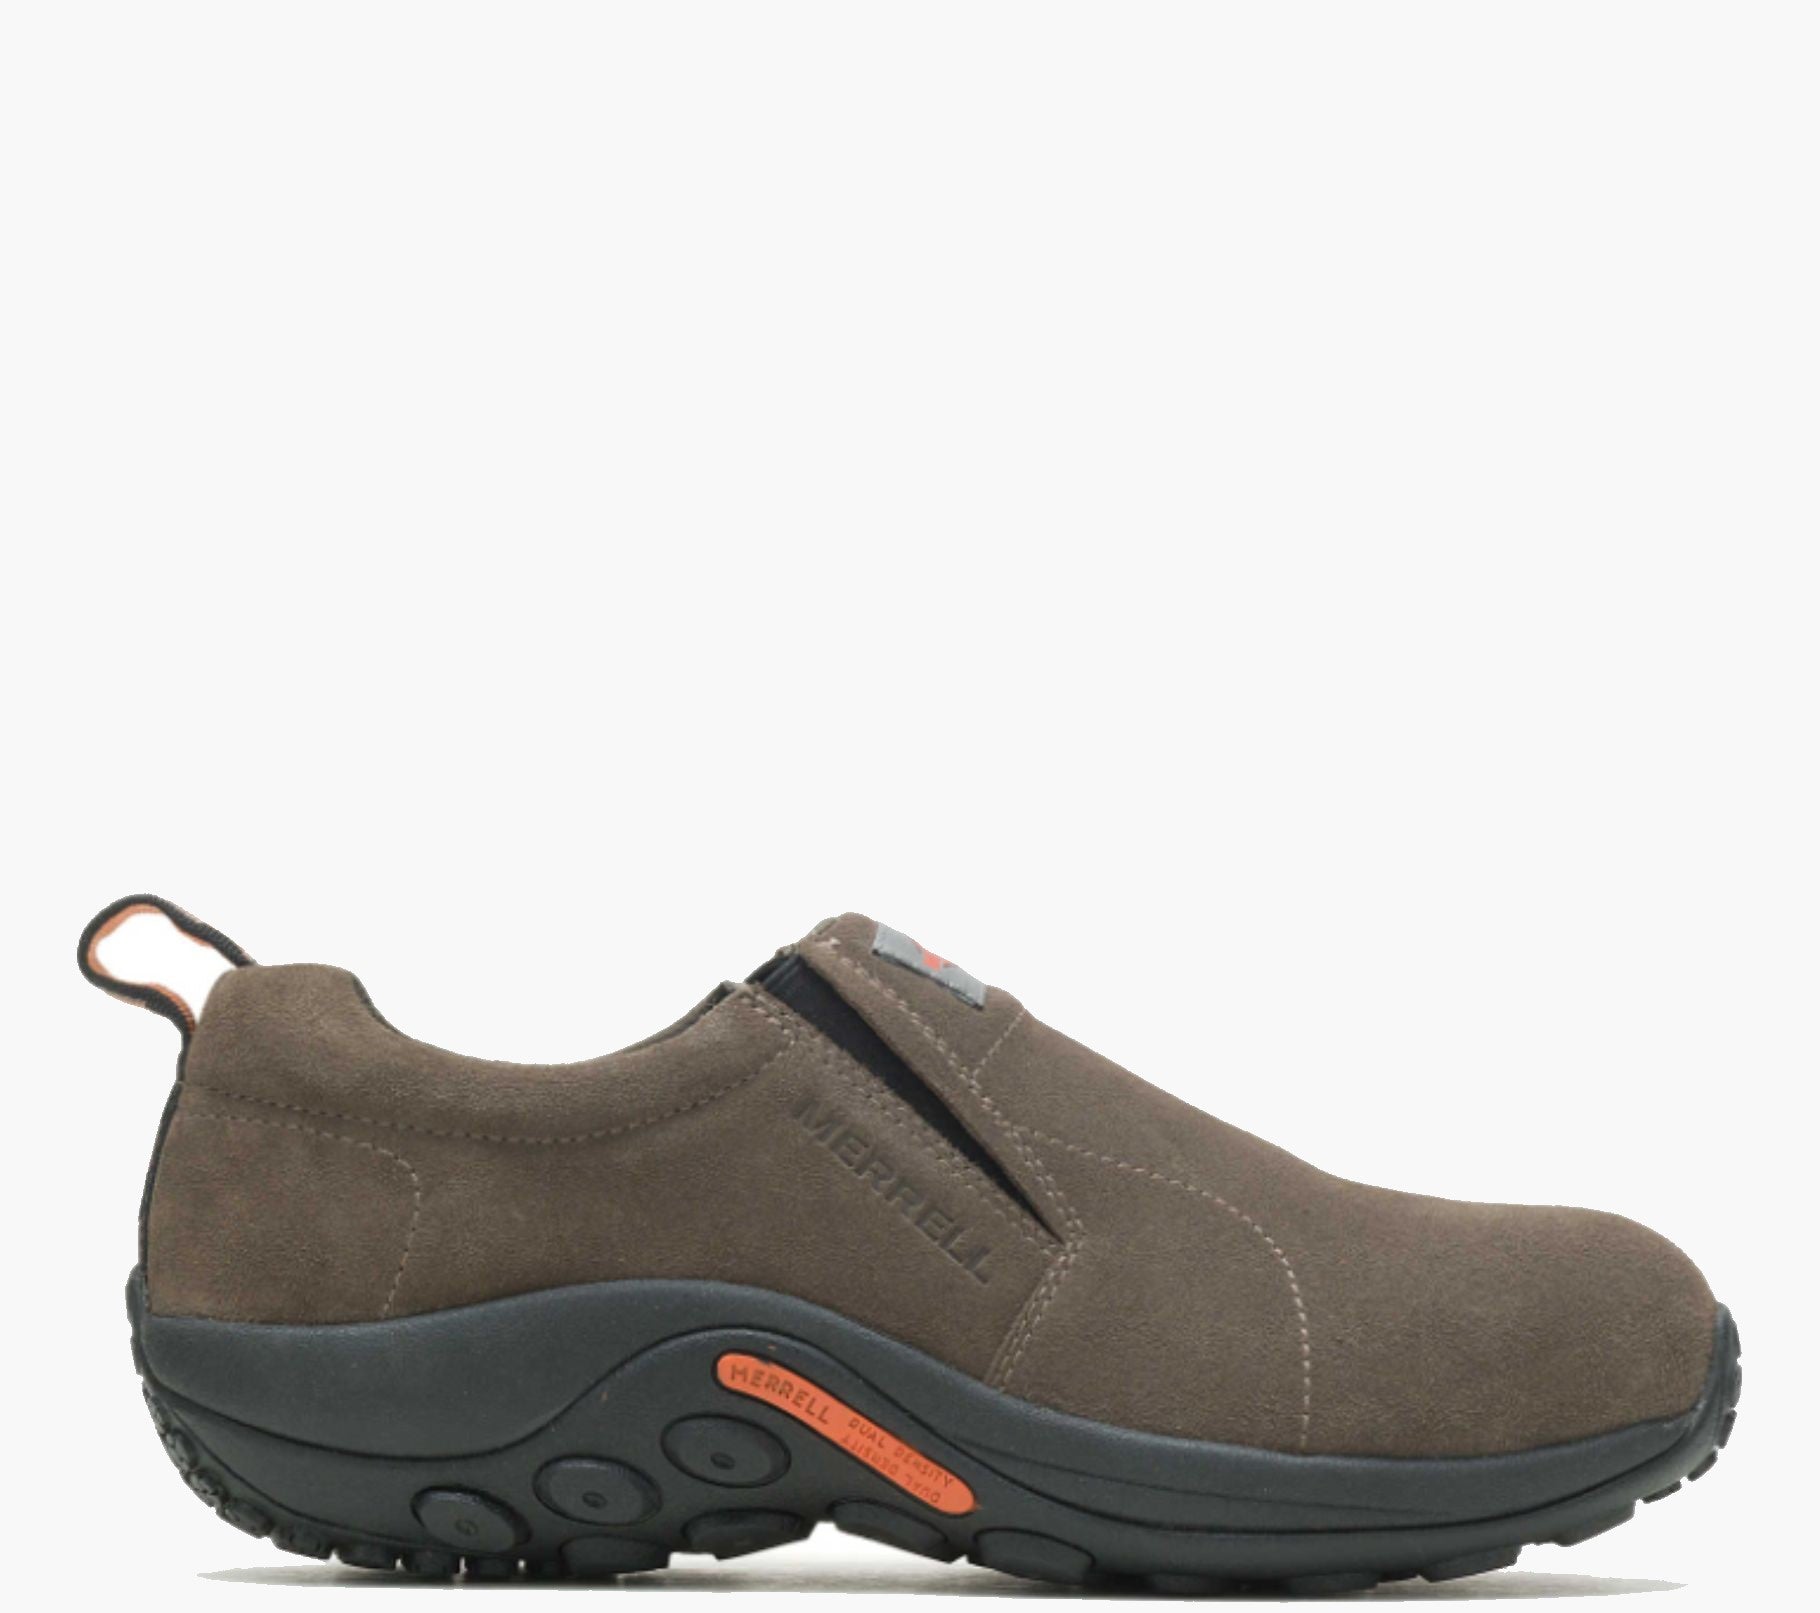 Merrell Work Jungle Moc EH AT Suede Slip-On Shoe - Work World - Workwear, Work Boots, Safety Gear